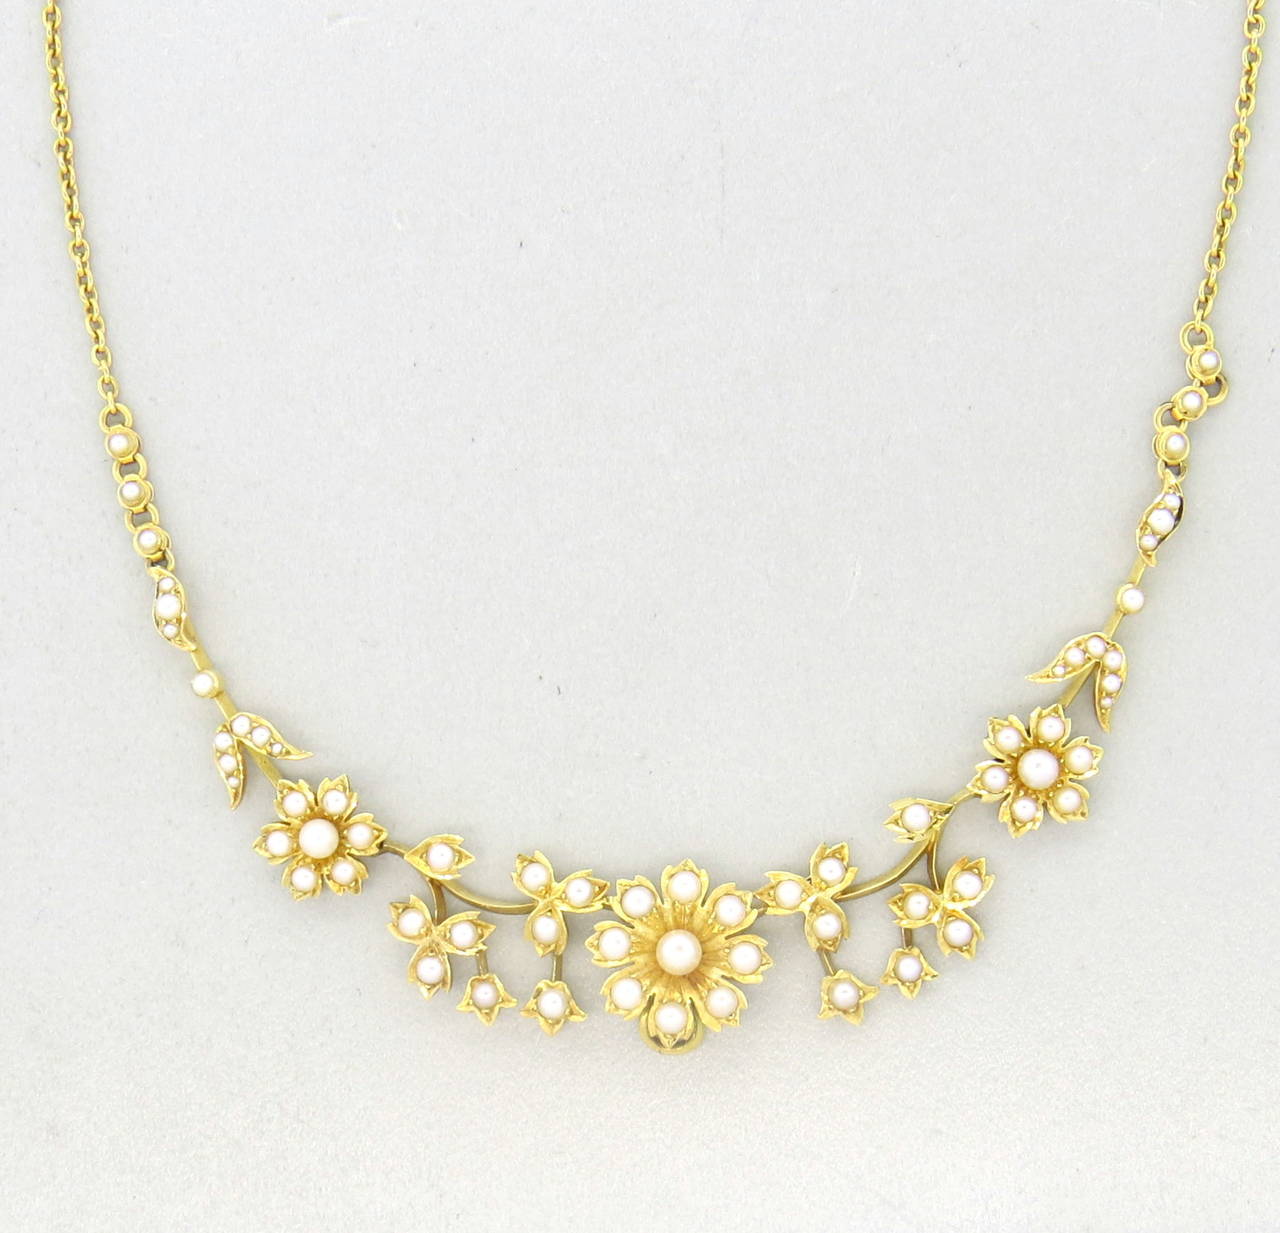 A 15k yellow gold necklace set with pearls ( 2mm - 3.6mm)  retailed originally by Hall & Co. of Manchester in original fitted box.  The necklace measures 15